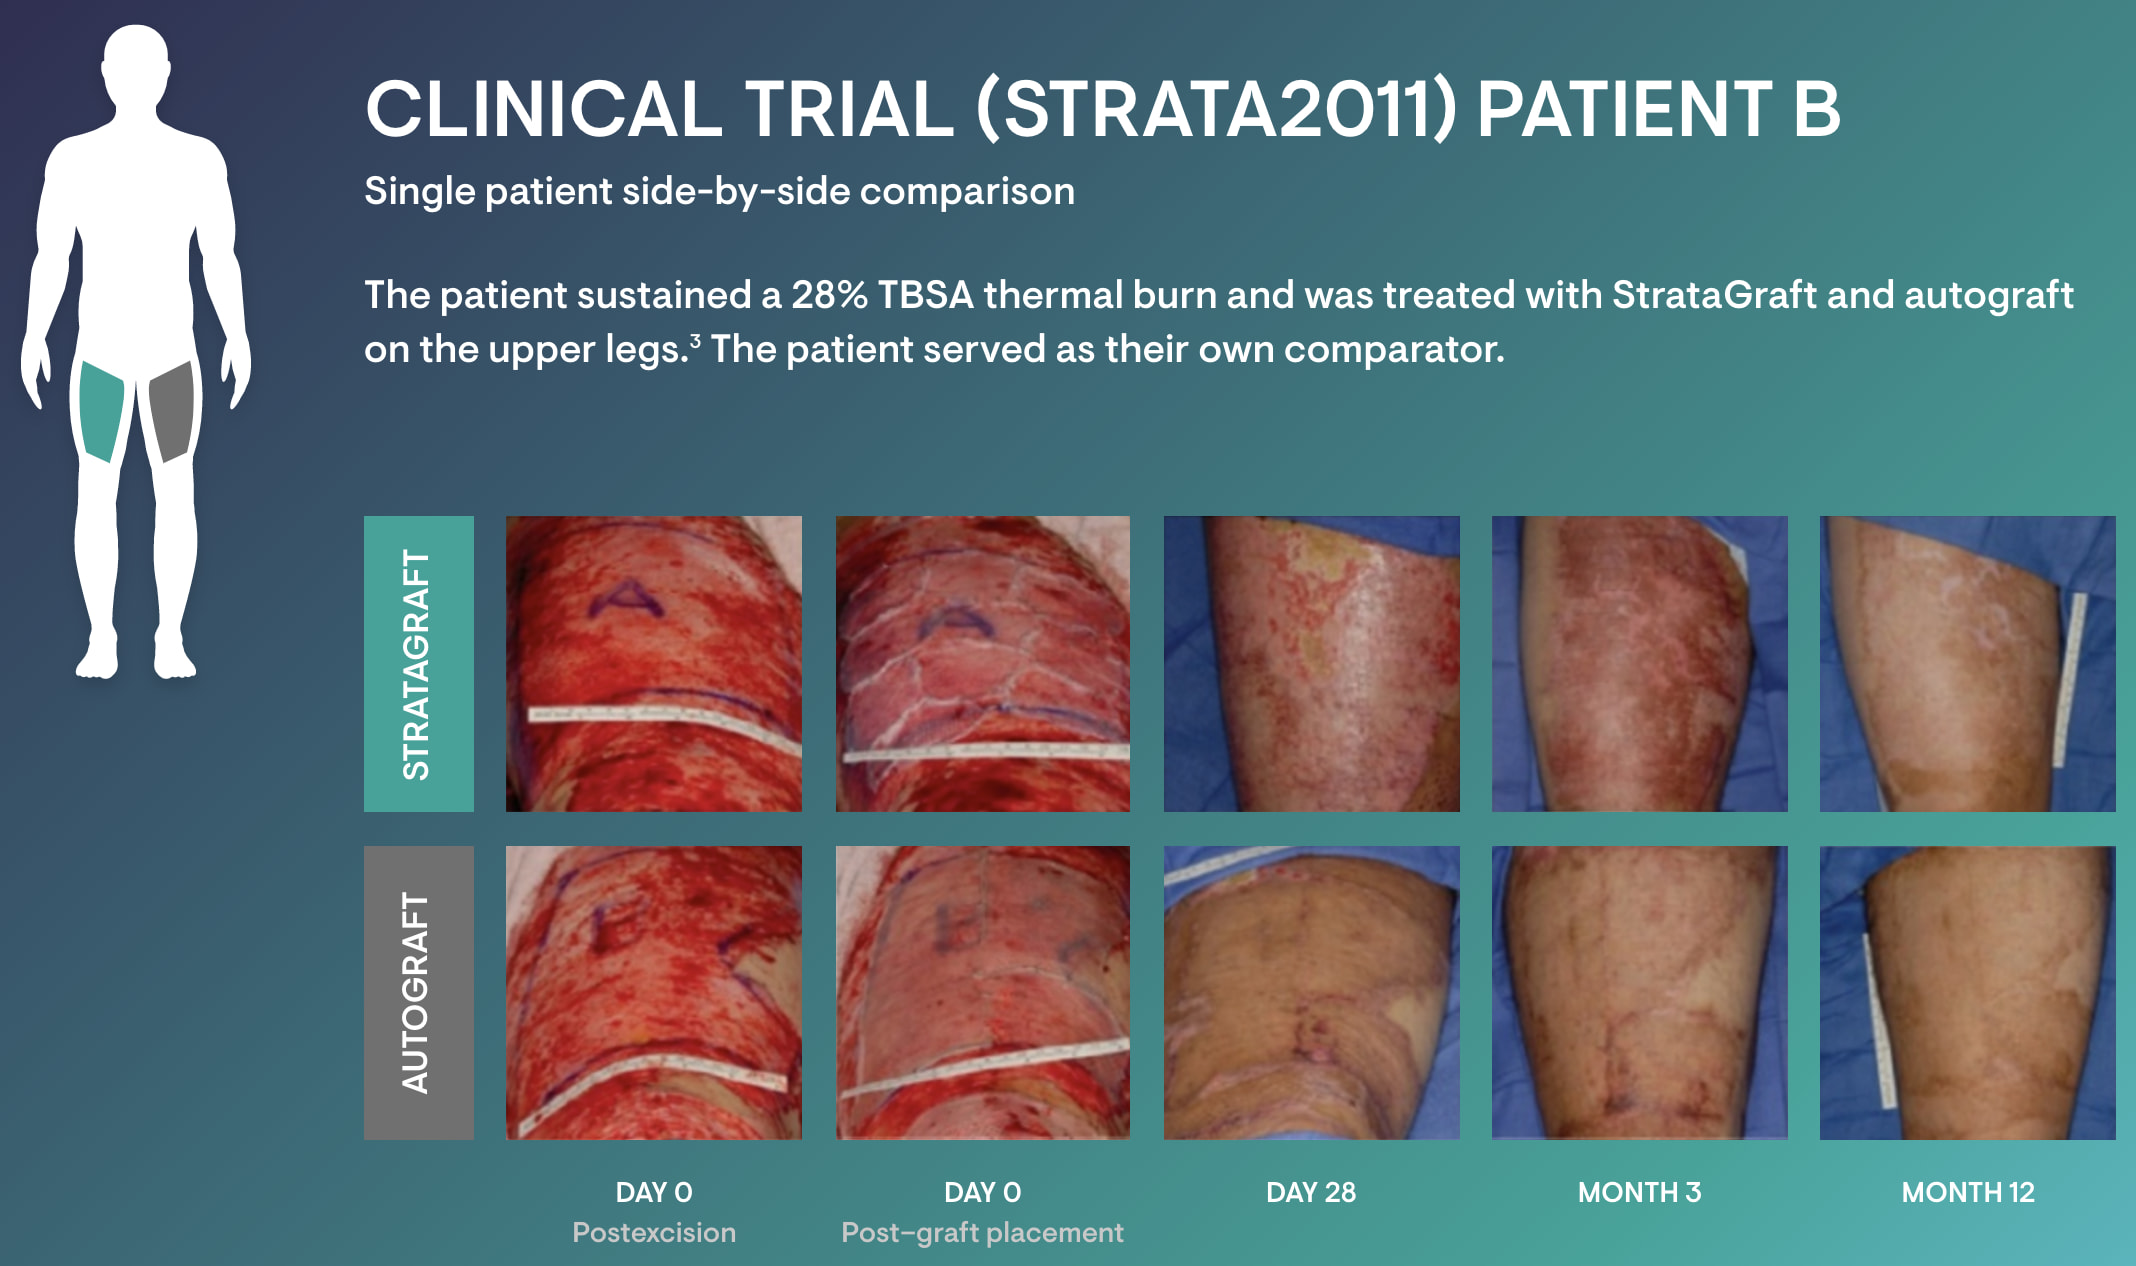 stratagraft cosmesis 02 - StrataGraft: Artificial Skin for Treatment of Severe Thermal Burns